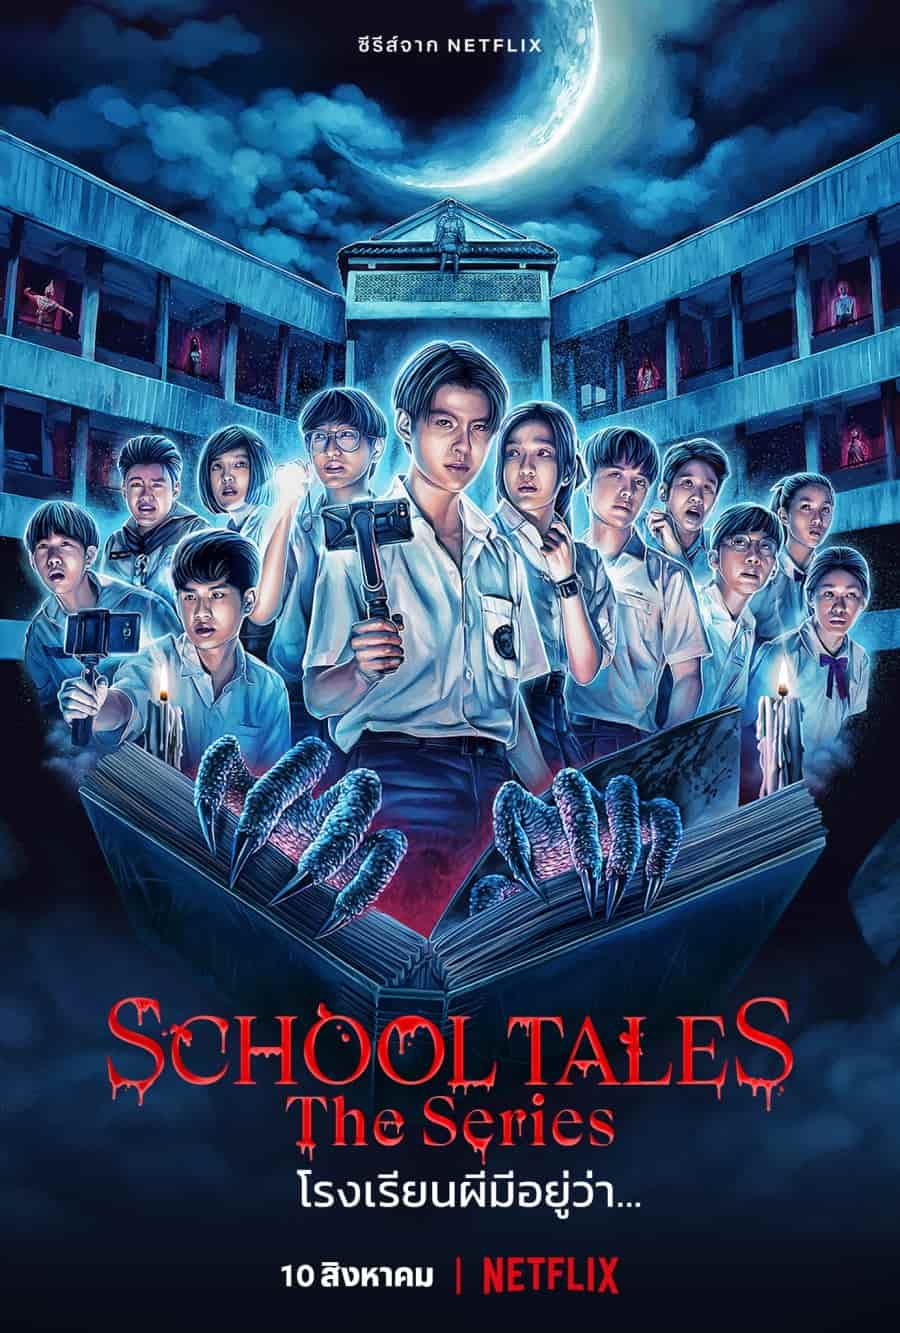 School Tales the Series - Sinopsis, Pemain, OST, Episode, Review